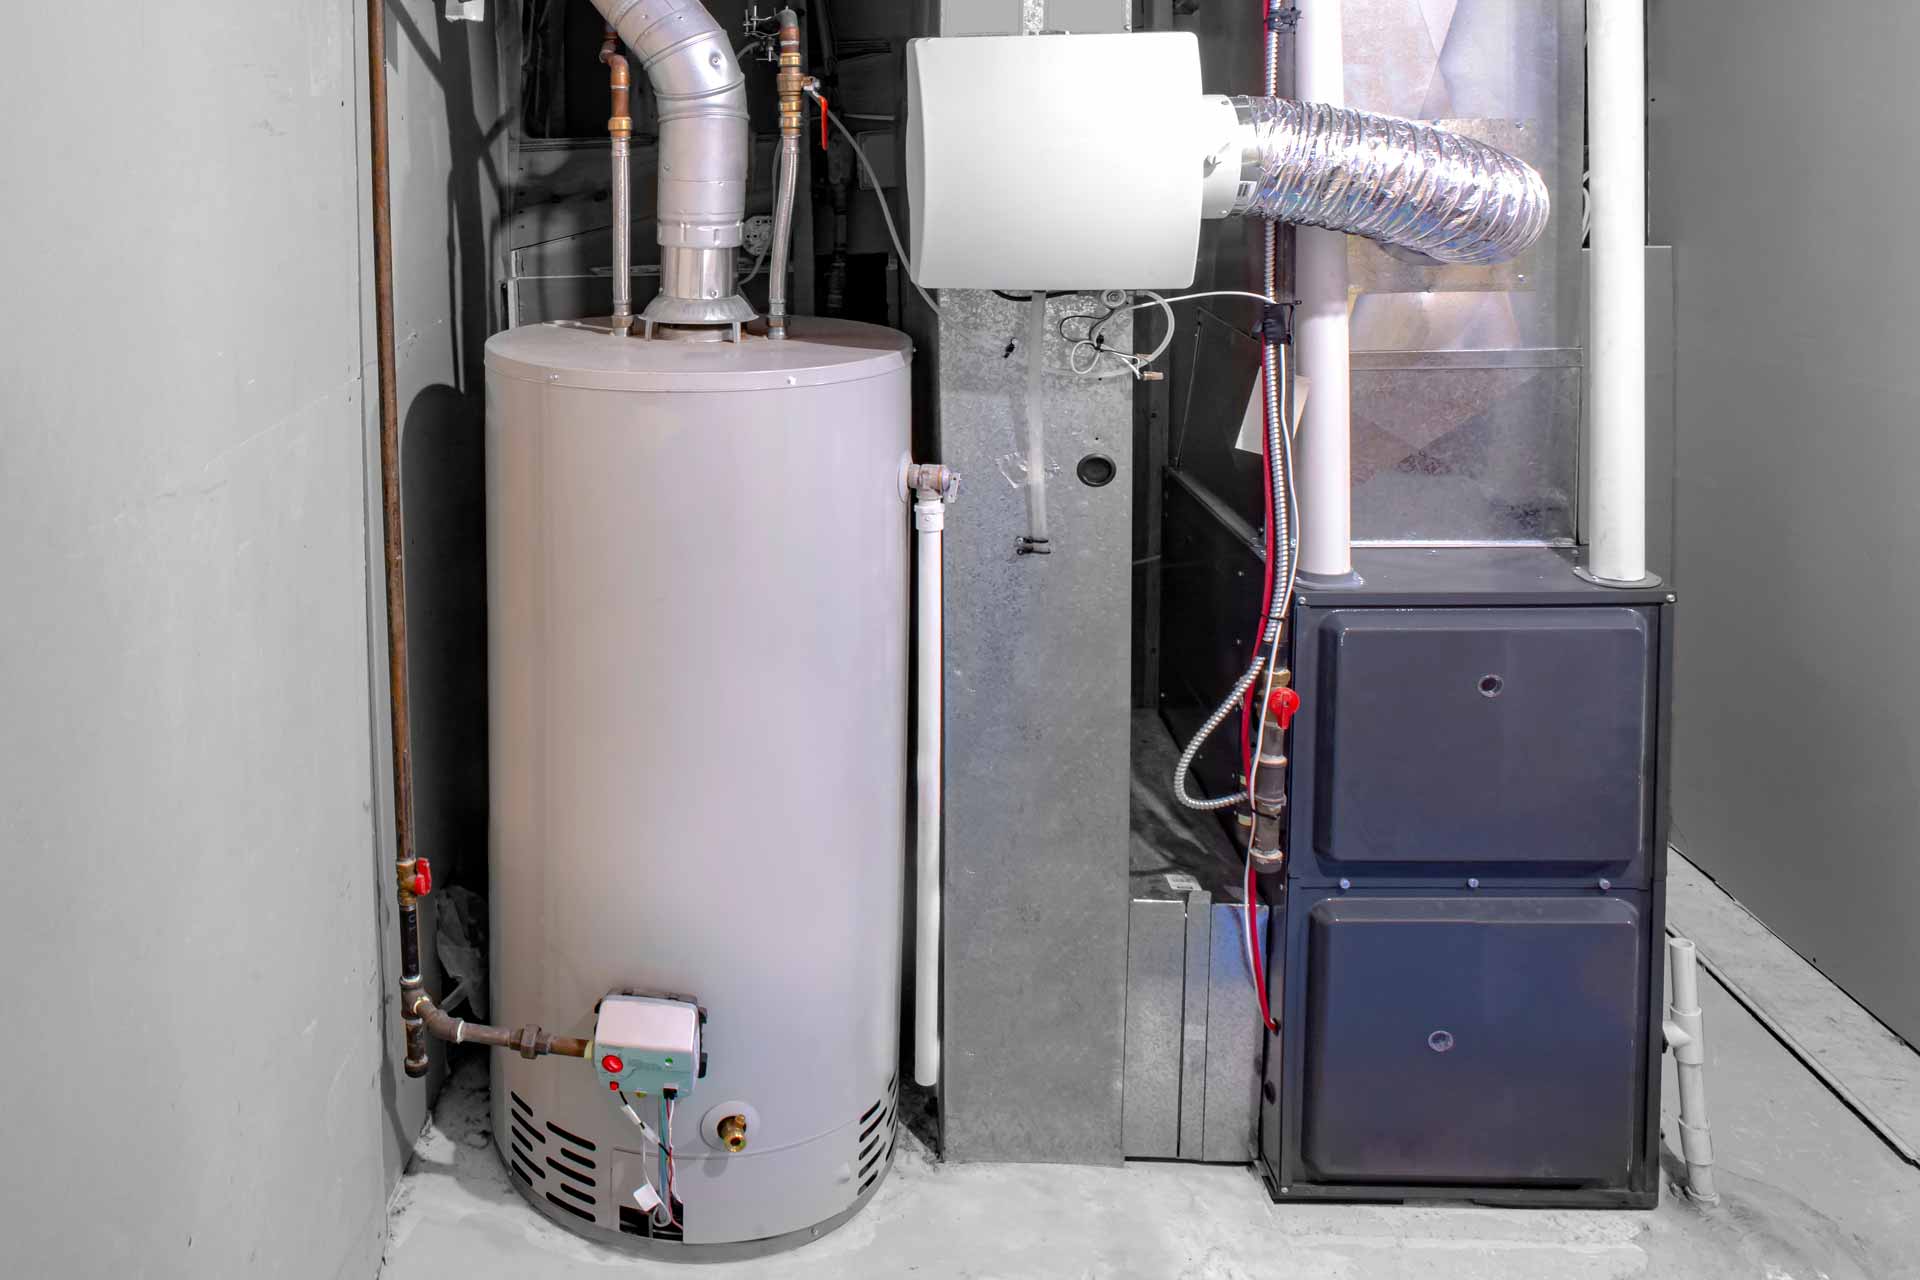 Water heater and furnace